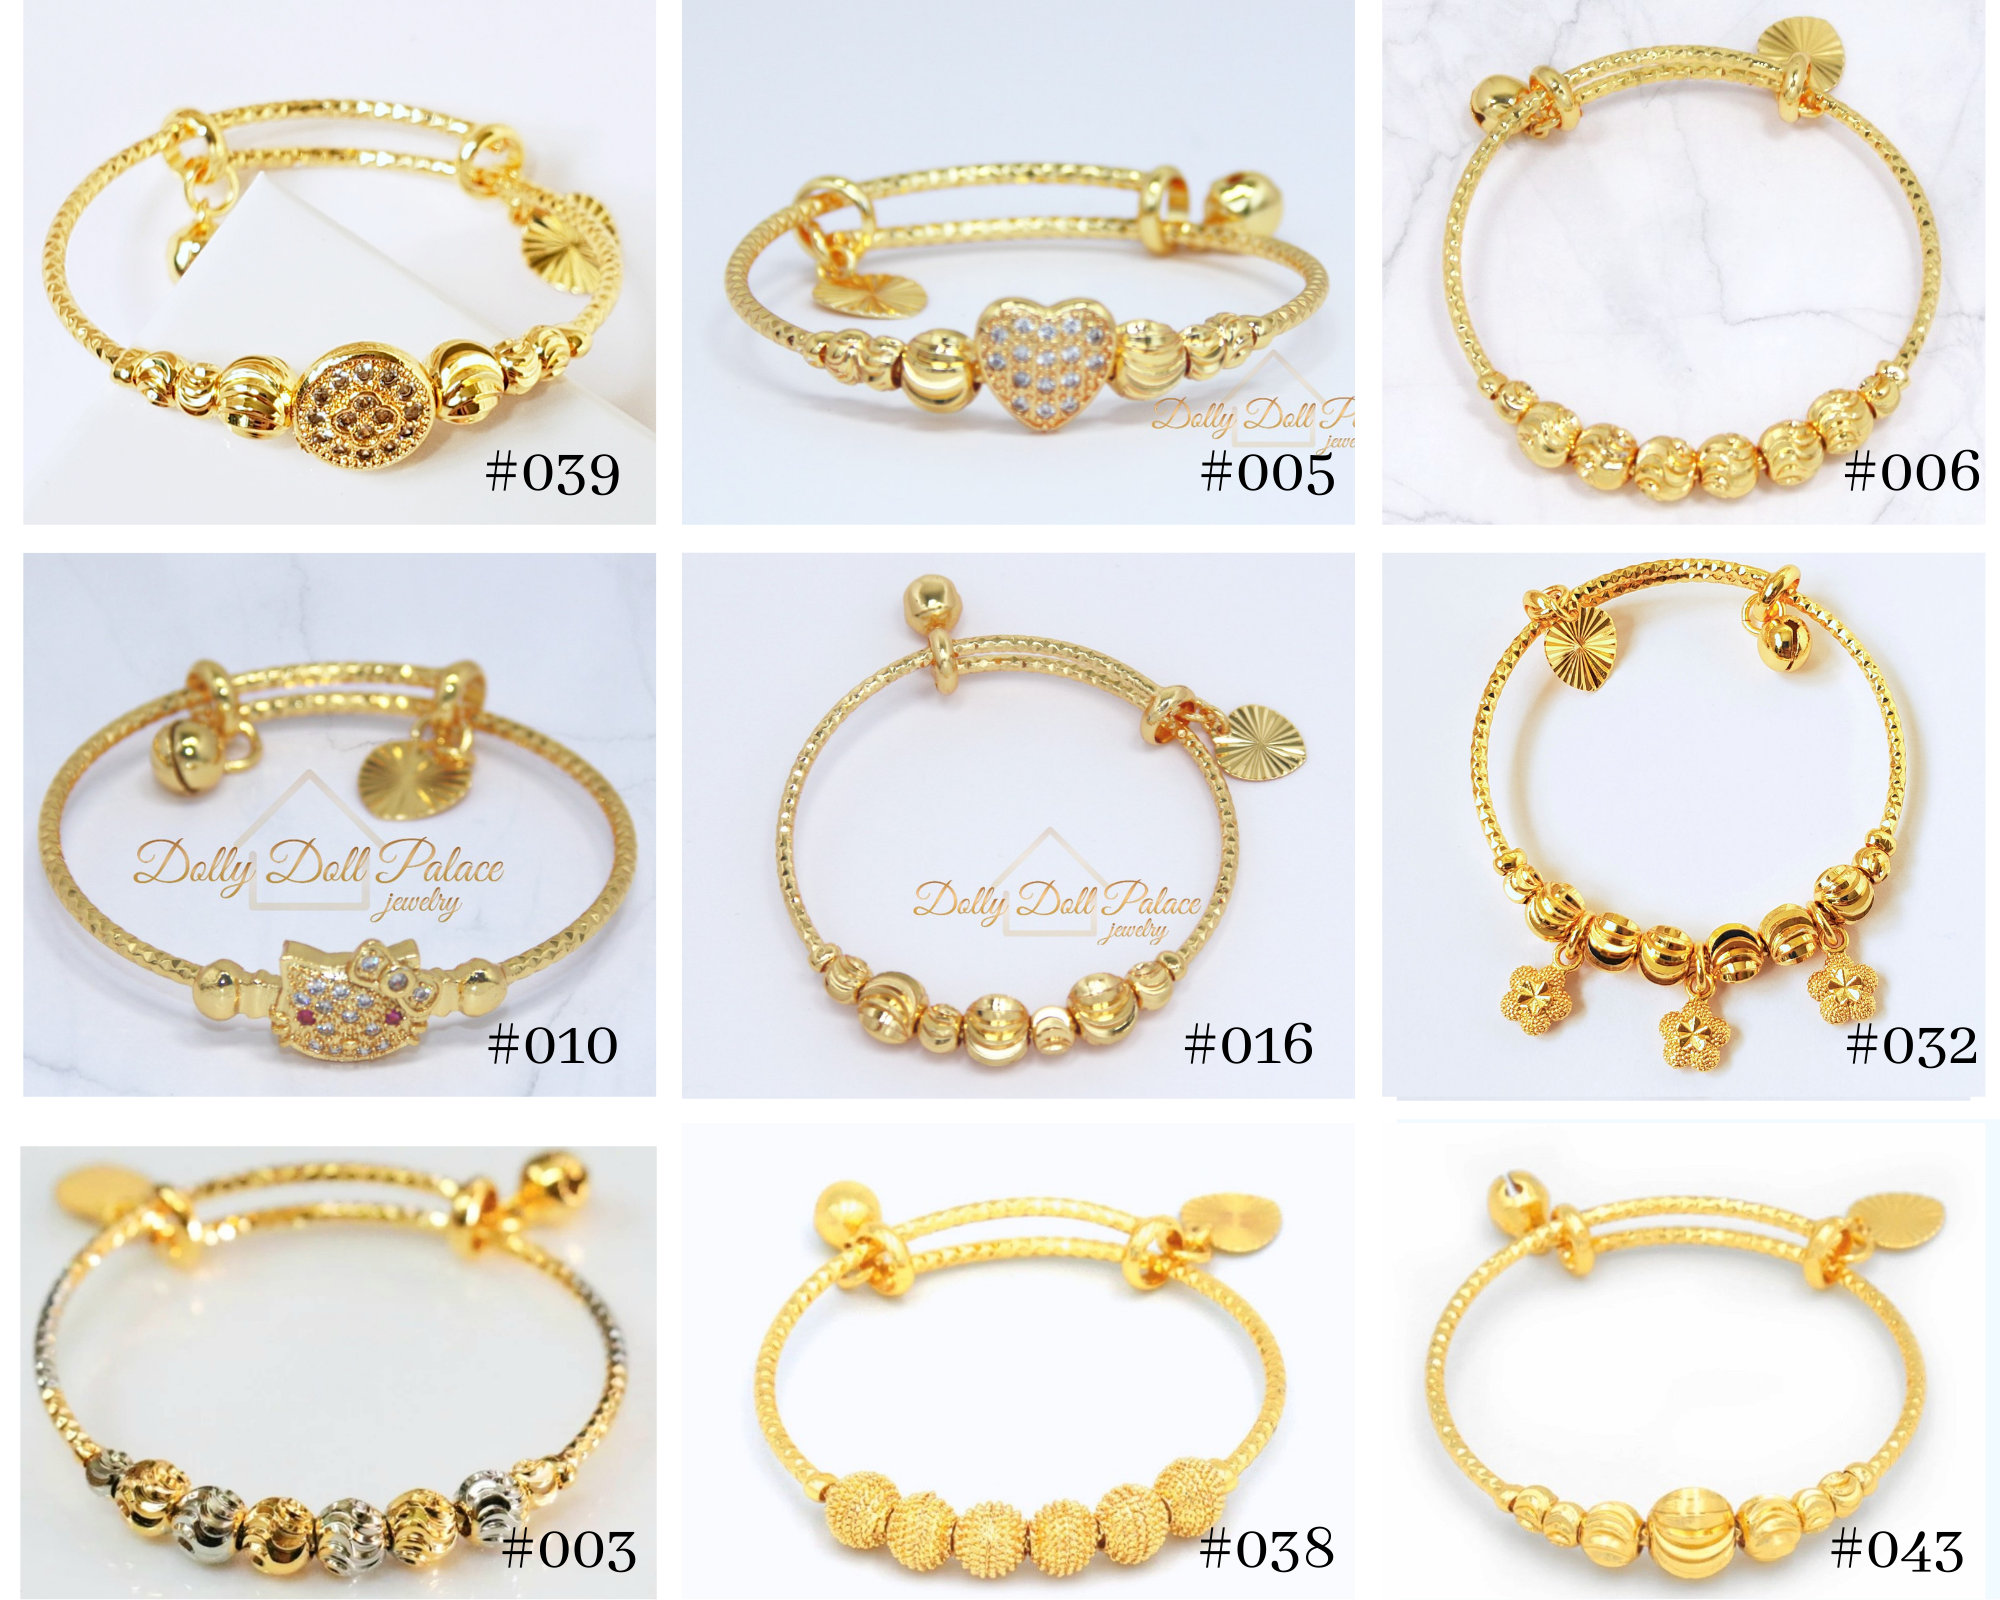 NishuGold Forming Jewellery - 1 , 2 Gram Gold Plating Jewellery - ITEM -  Gold Forming Culcatti Bangles ( 4 Pc ) CODE - Afbn001 PRICE - Rs. 2905 Size  - 2.6 | Facebook